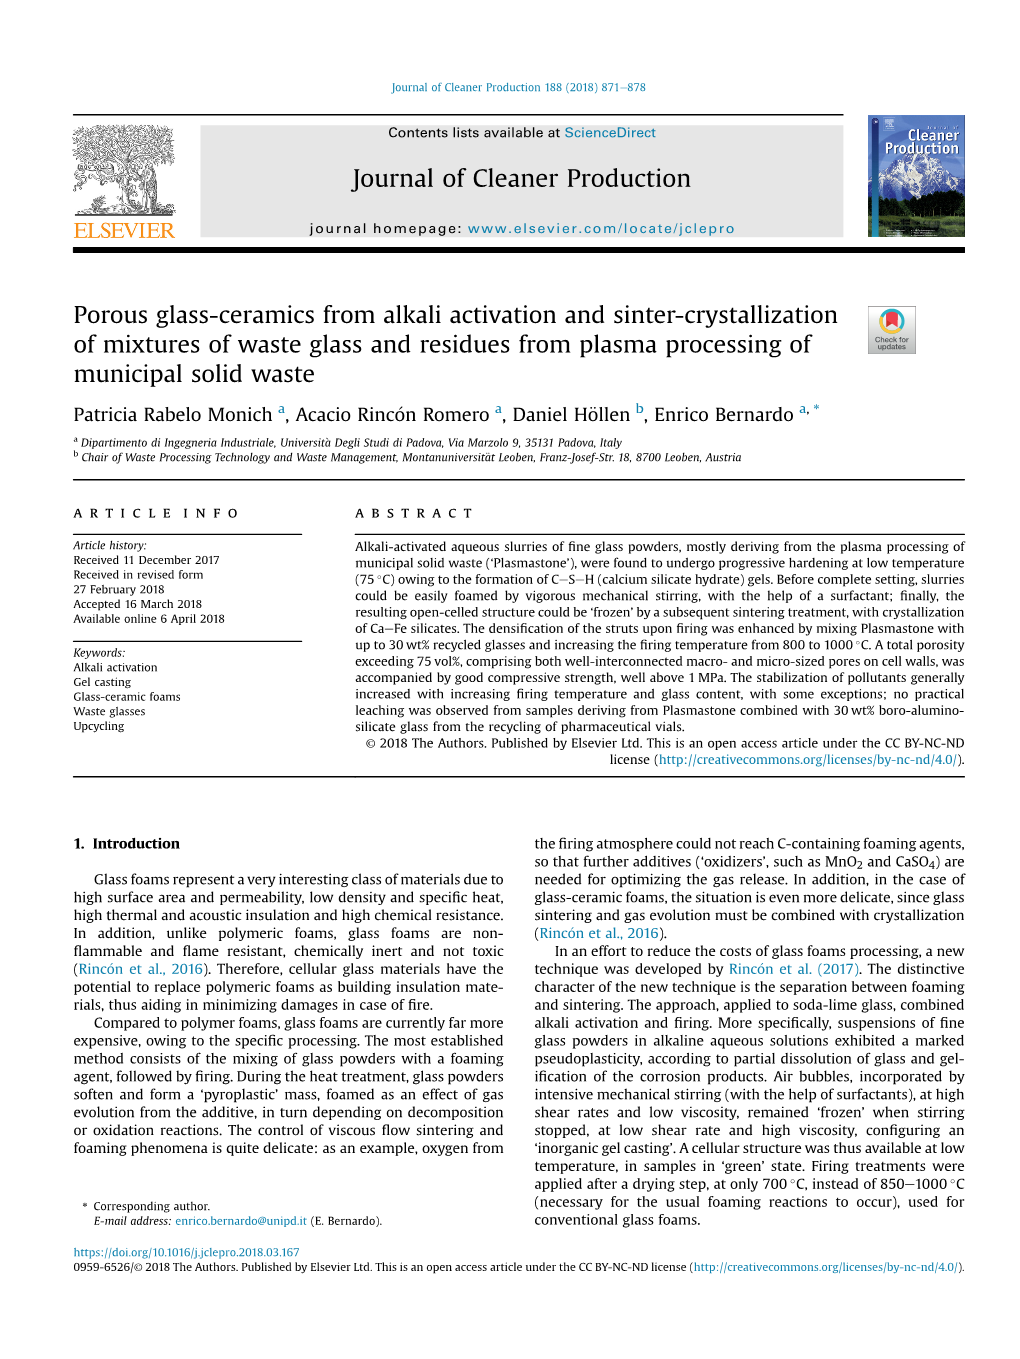 Porous Glass-Ceramics from Alkali Activation and Sinter-Crystallization of Mixtures of Waste Glass and Residues from Plasma Processing of Municipal Solid Waste